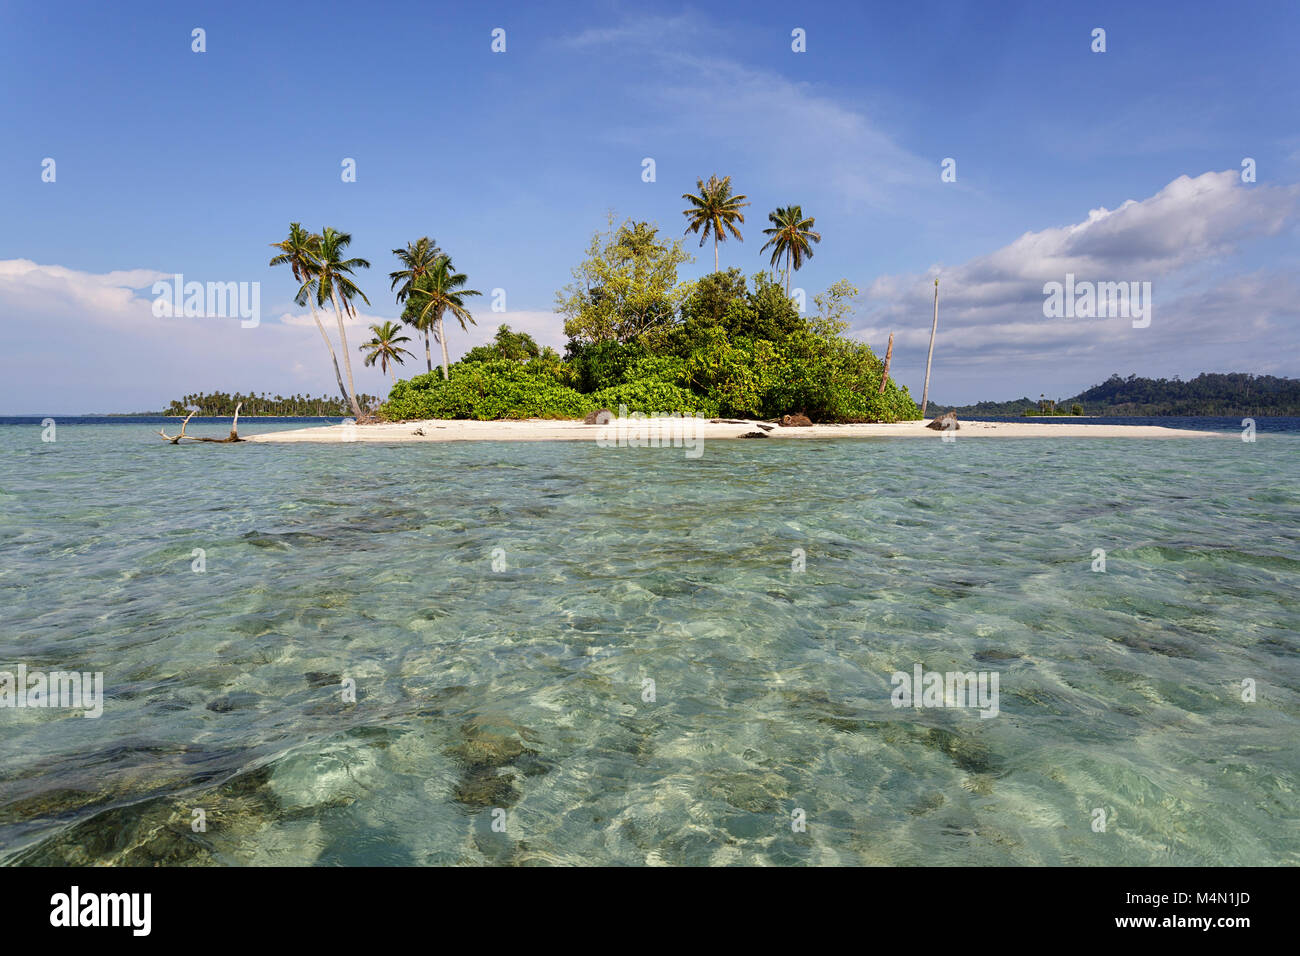 Small tropical island on horizon in beautiful tropical turquoise blue waters. Stock Photo